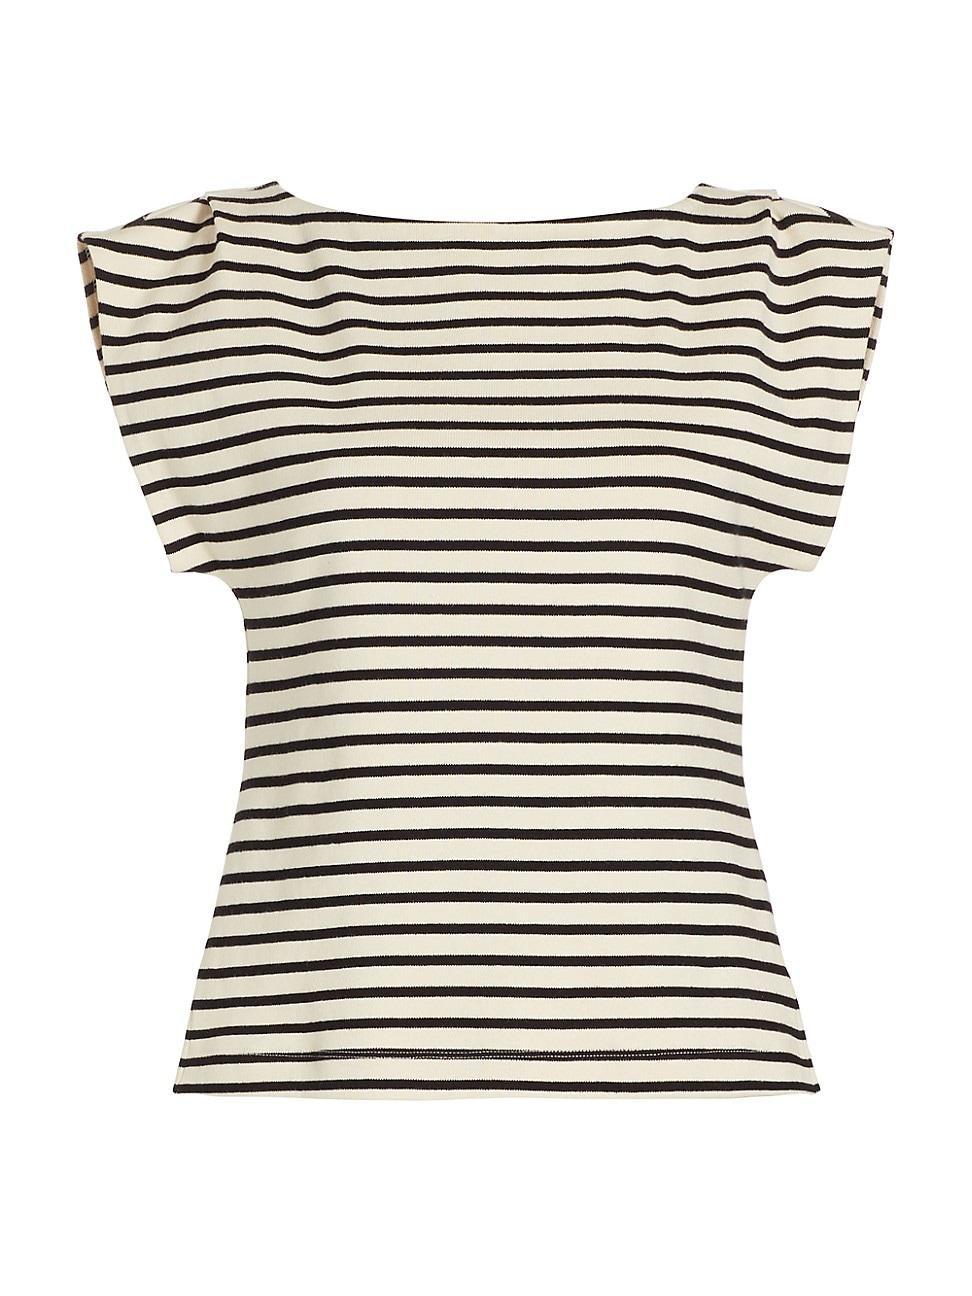 Womens Claire Striped Boatneck Top Product Image